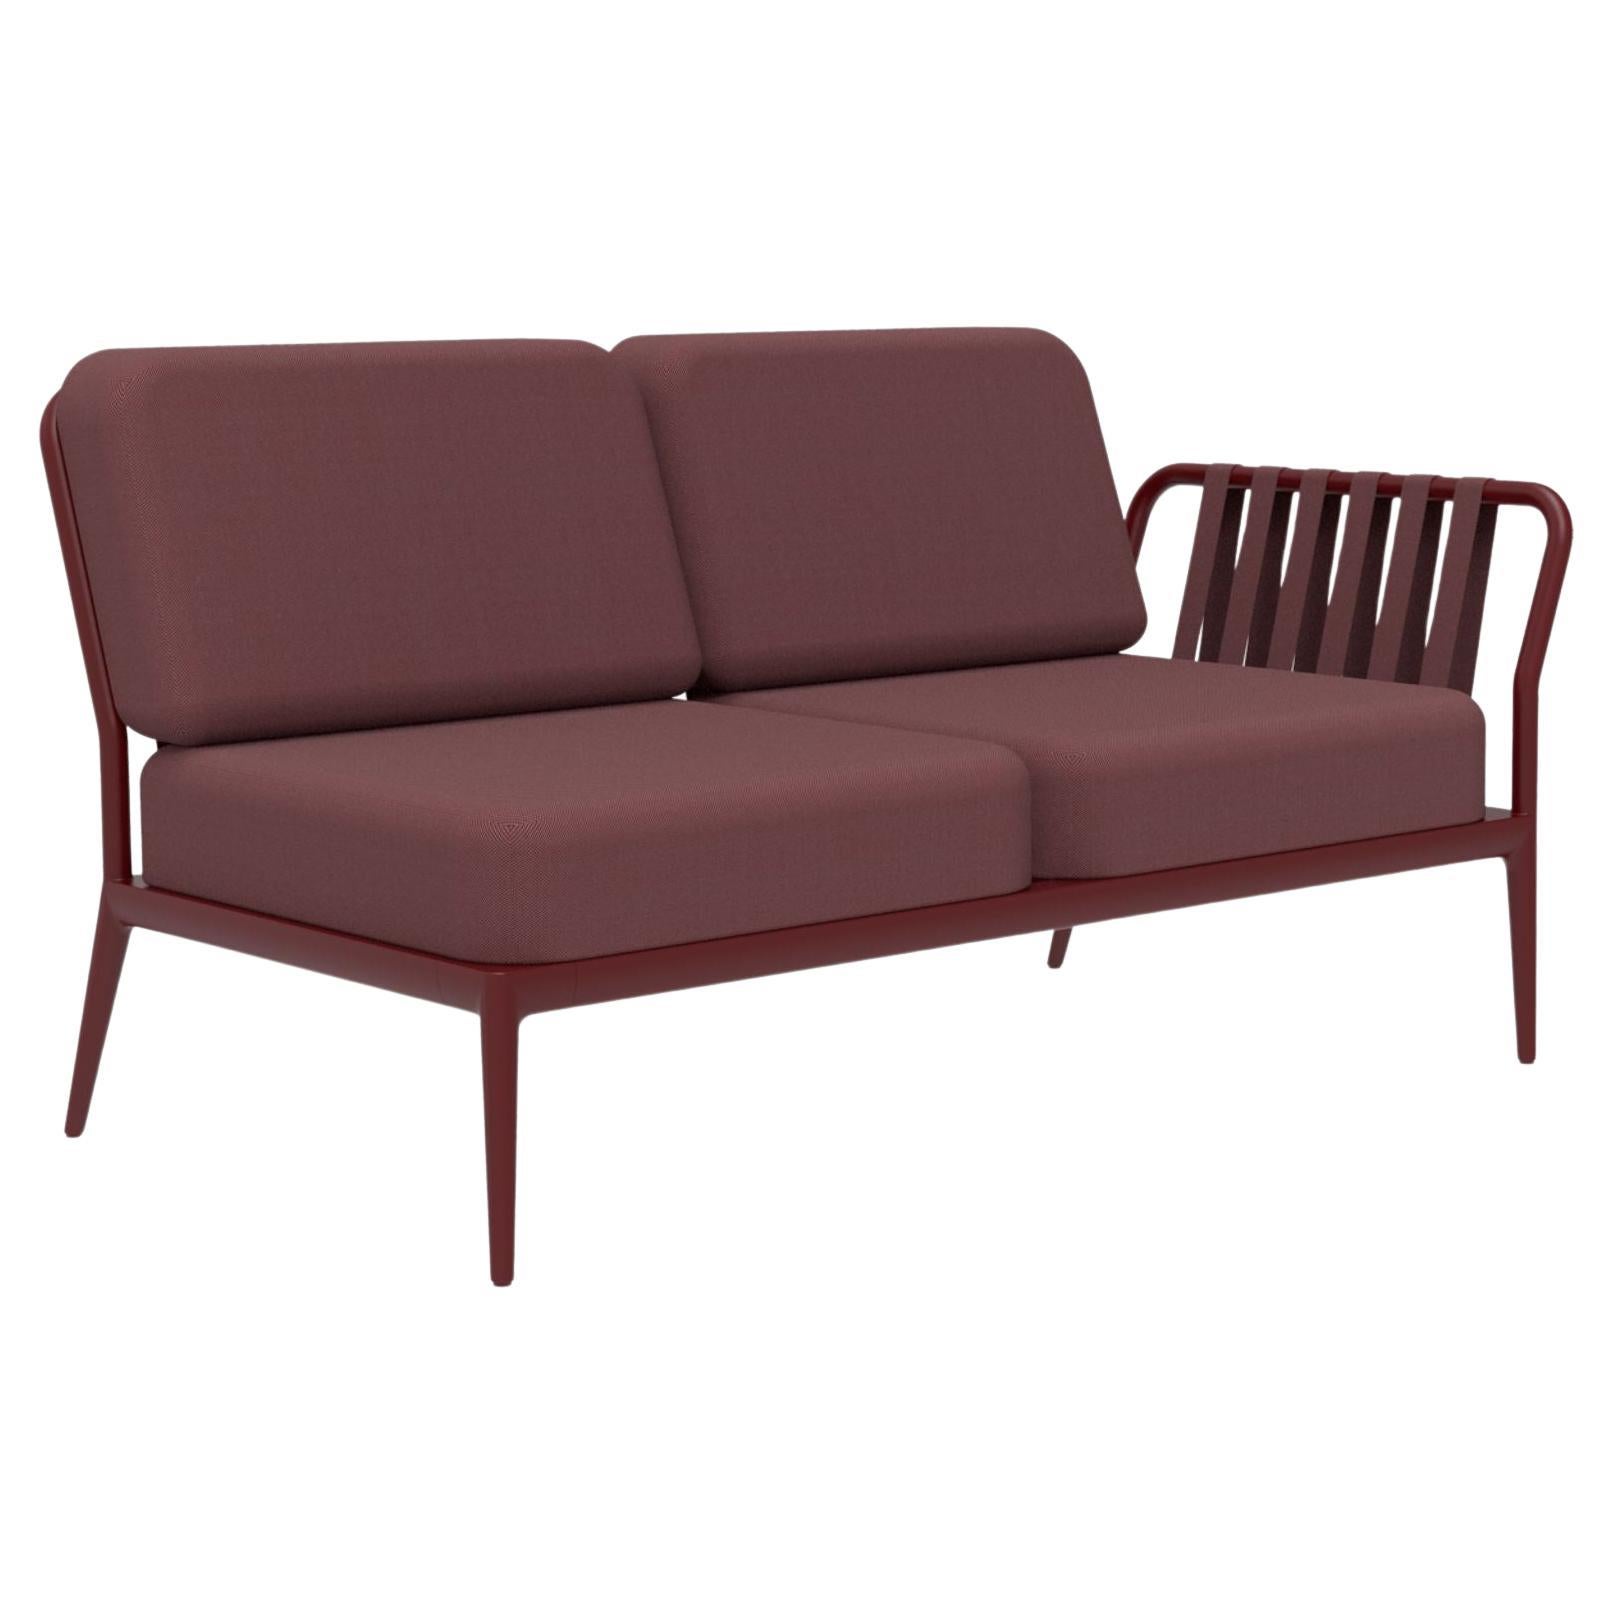 Ribbons Burgundy Double Left Modular Sofa by MOWEE For Sale